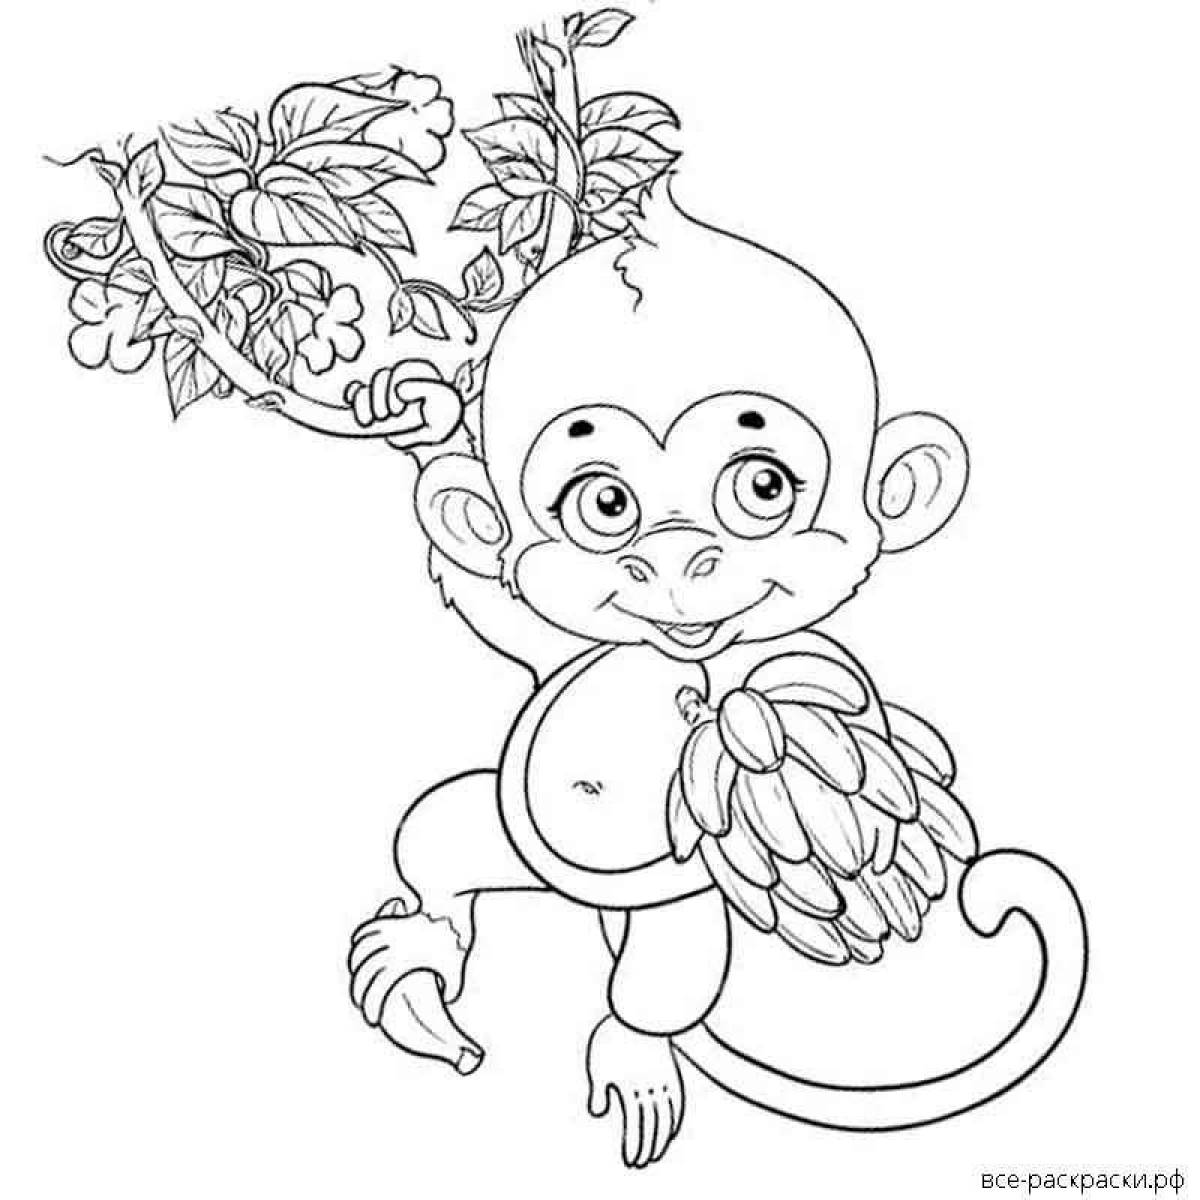 Funny monkey coloring book for kids